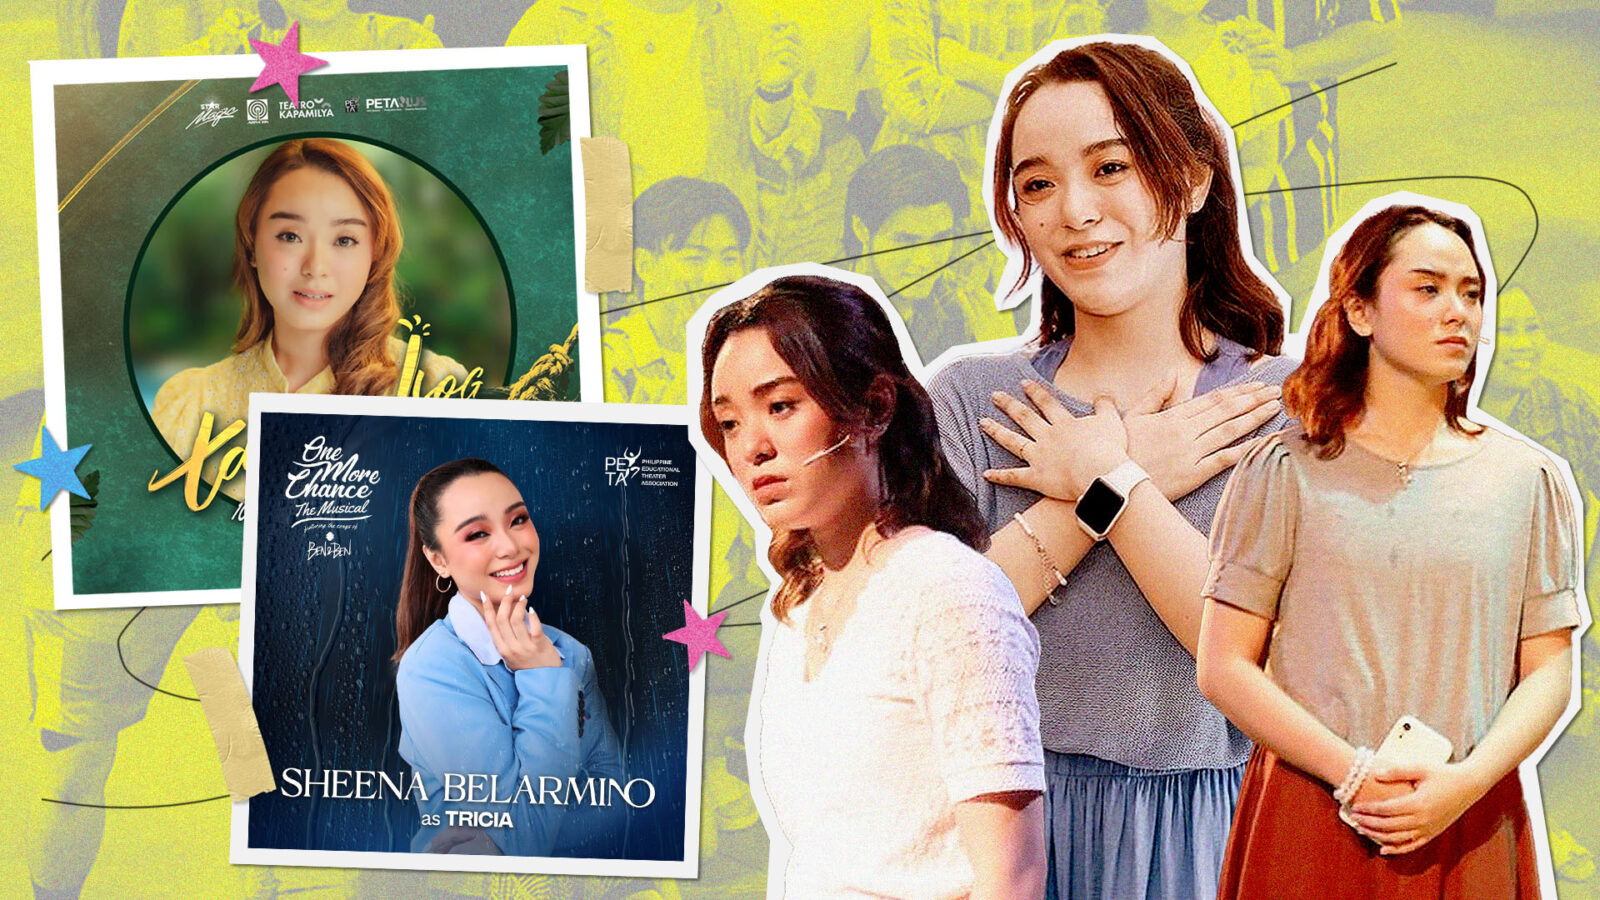 A Triple Threat And More: 7 Fun Facts About Rising Musical Artist and One More Chance: The Musical Star Sheena Belarmino